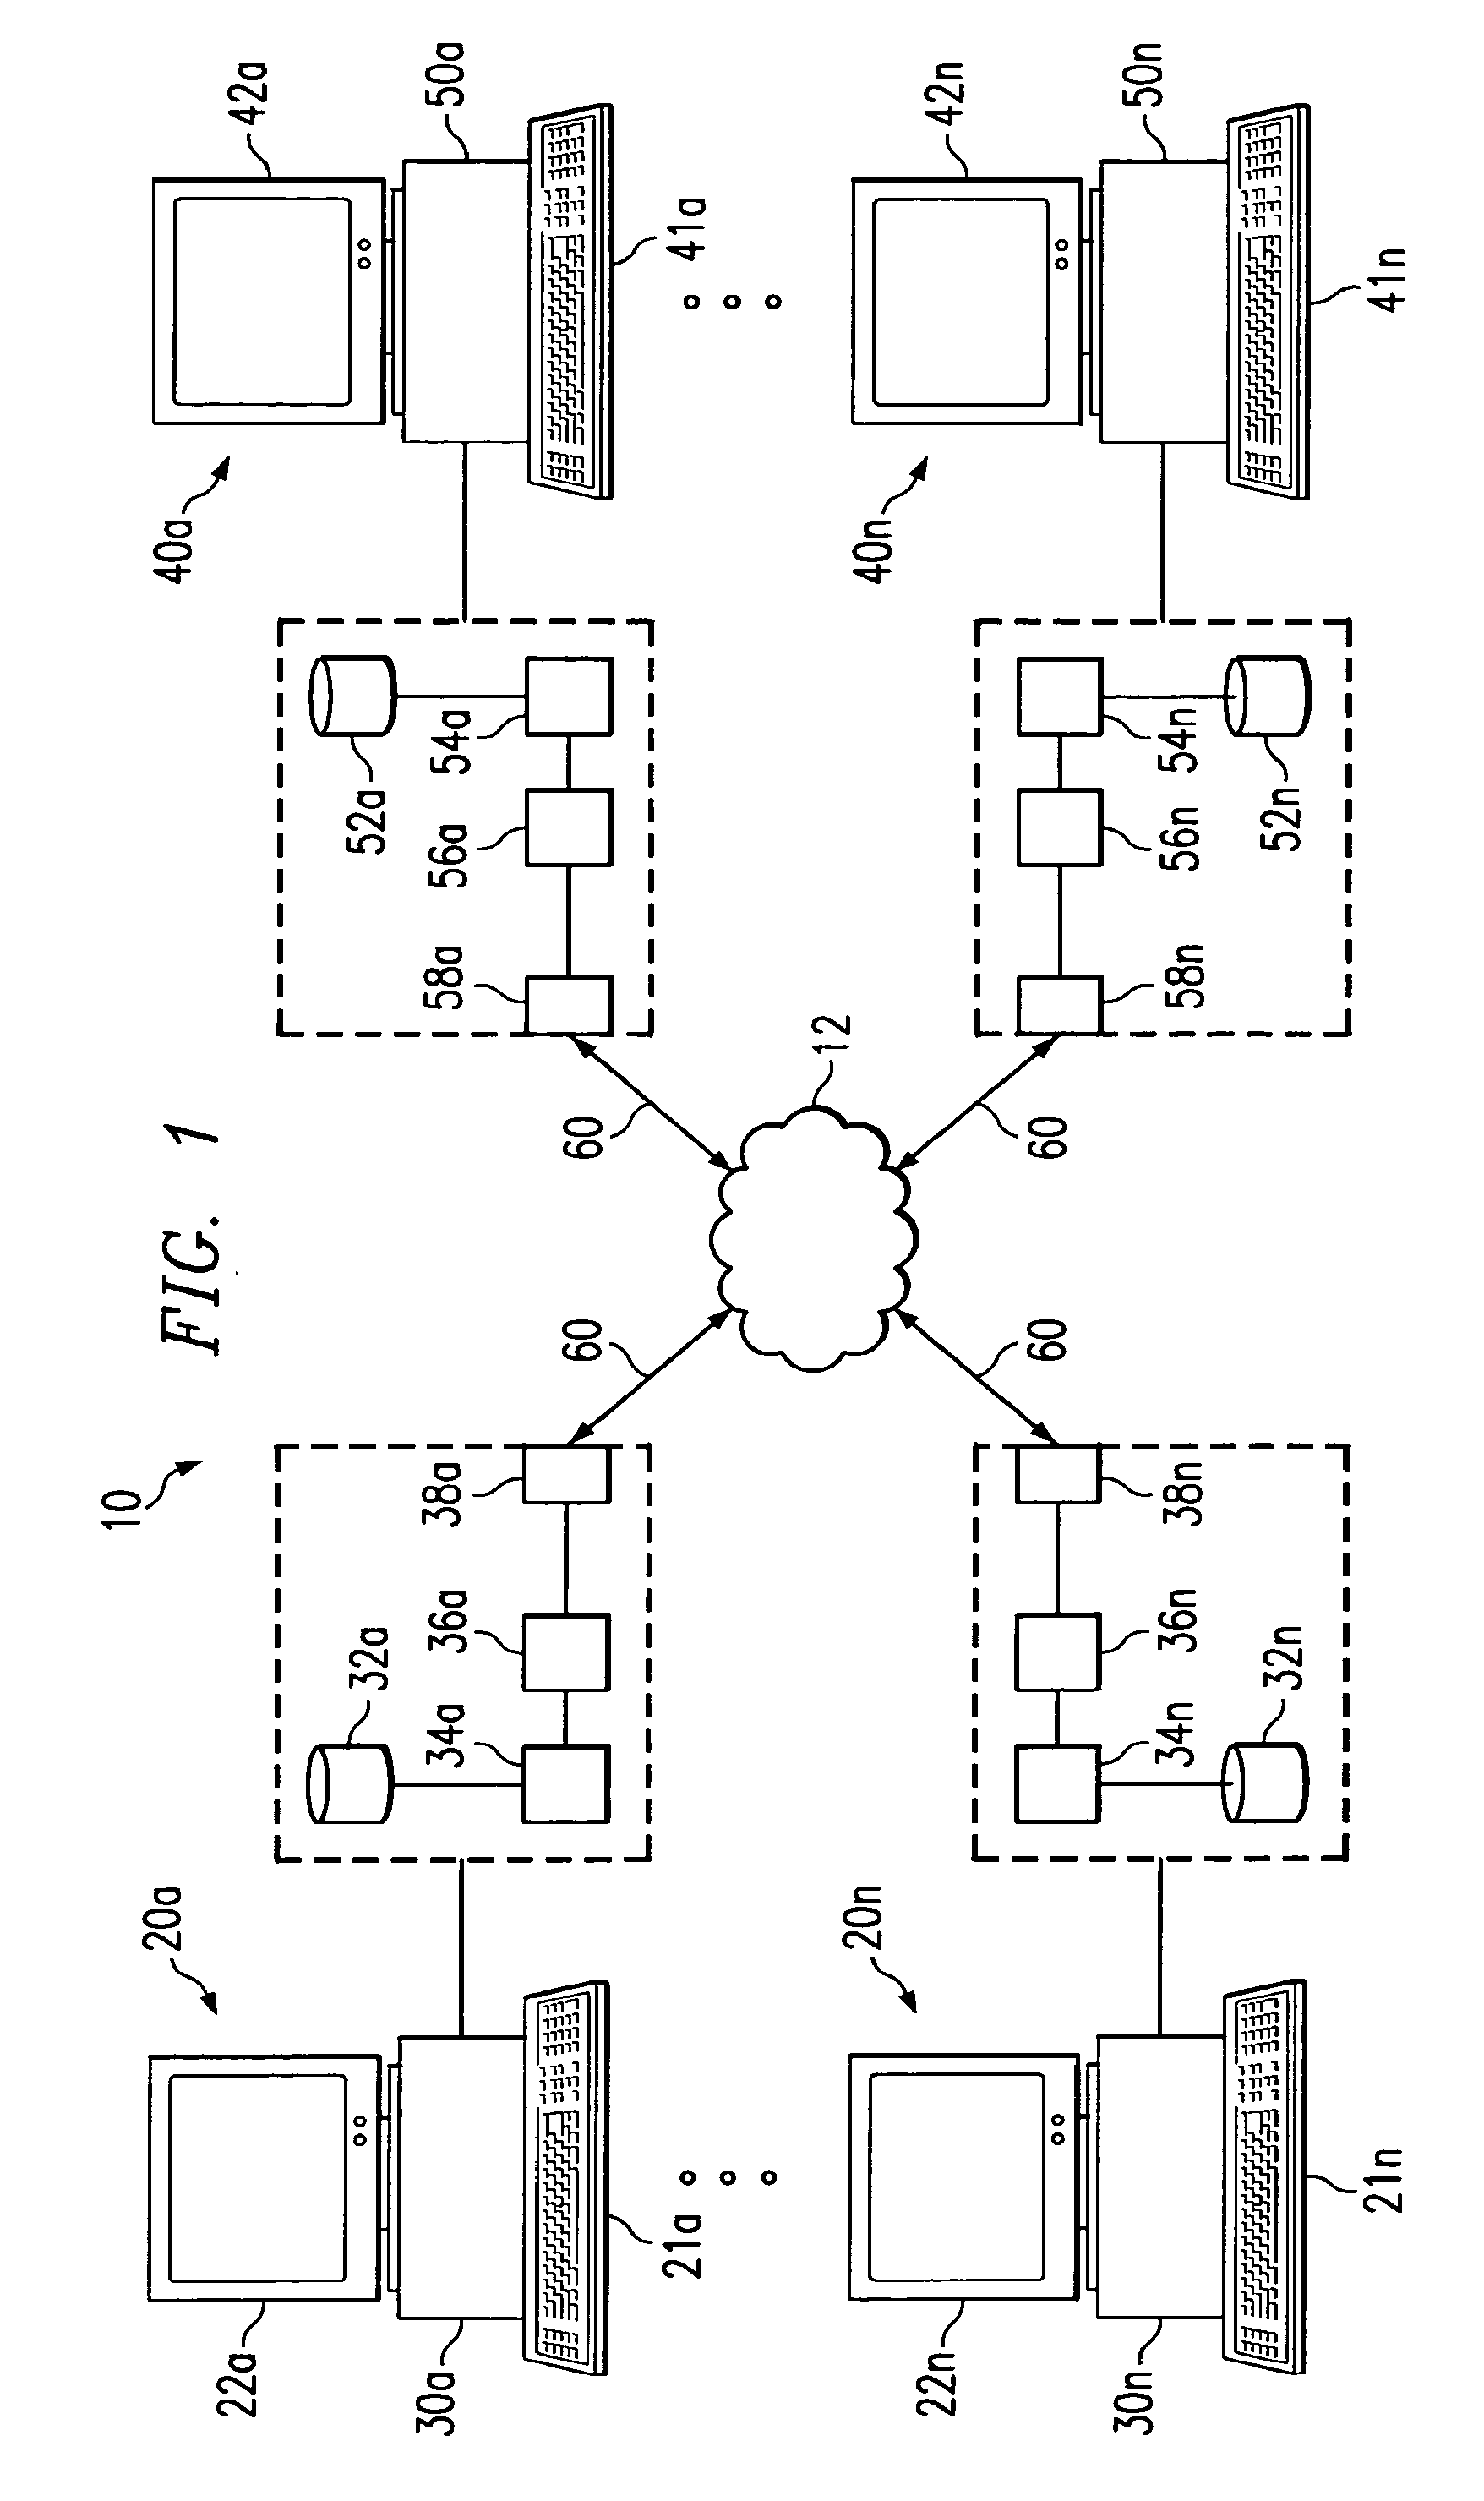 Method and System for Multi-Enterprise Optimization Using Flexible Trade Contracts